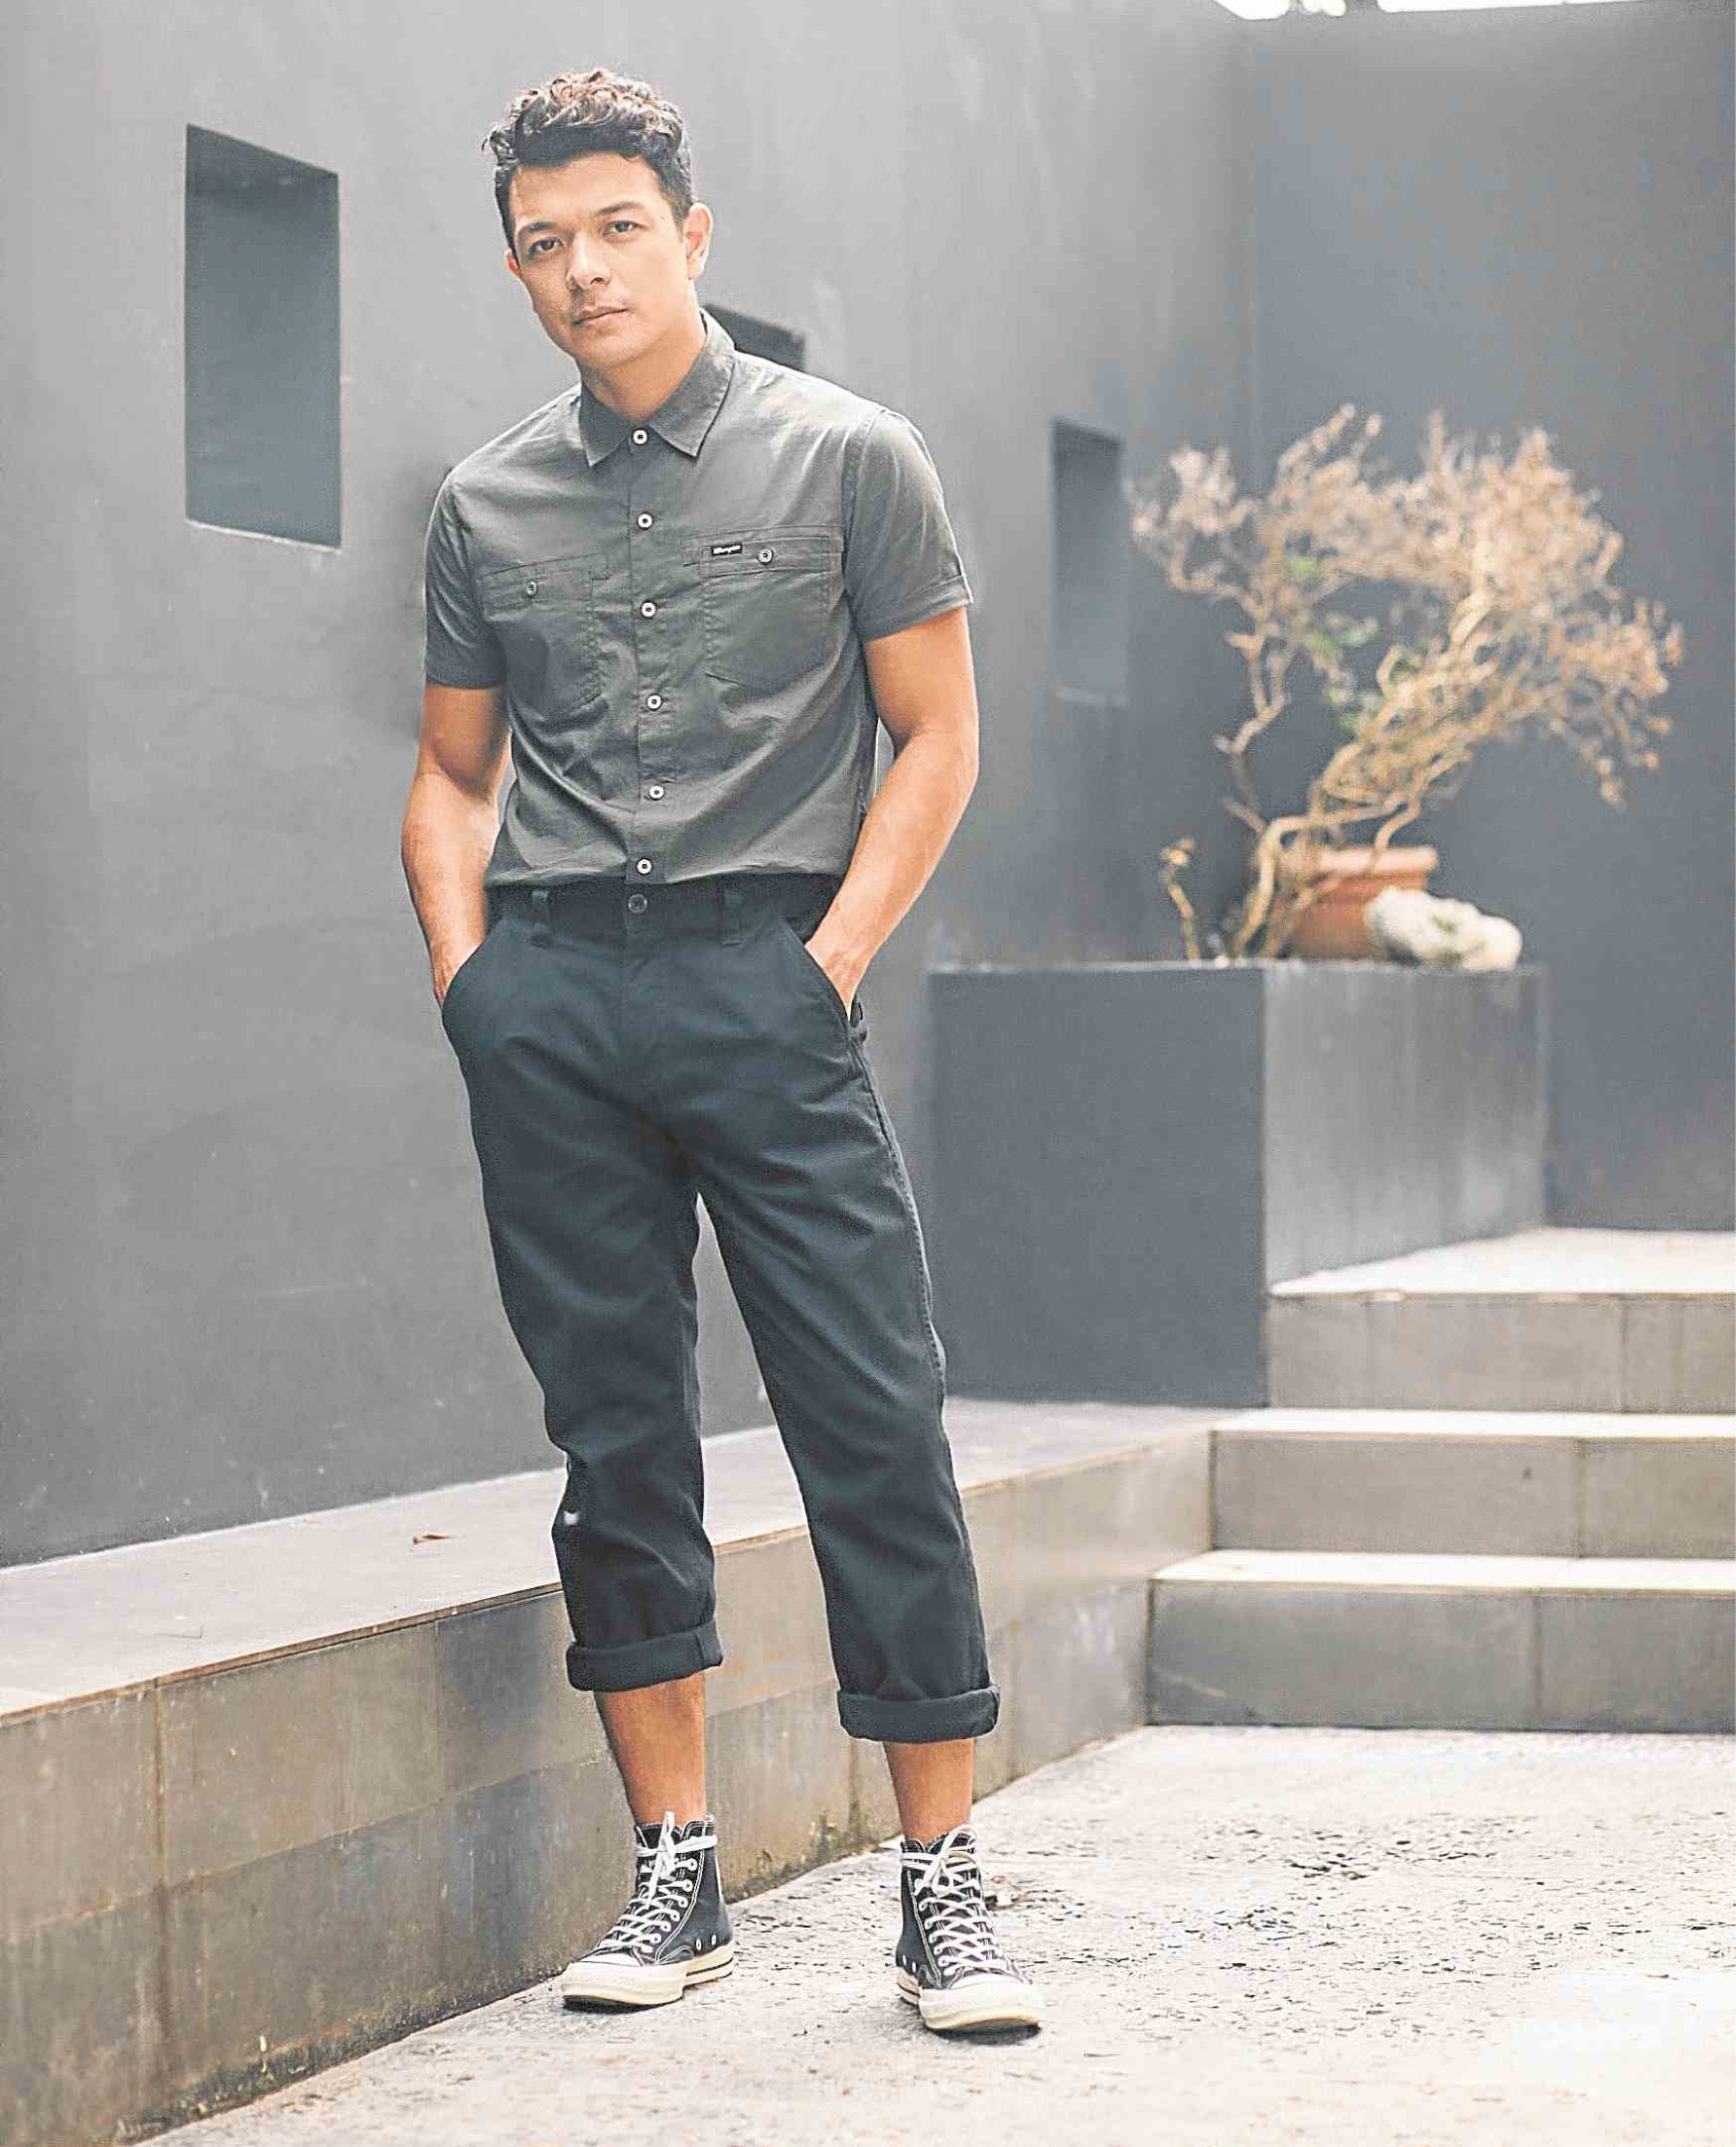 Directing a step out of Jericho’s comfort zone | Inquirer Entertainment